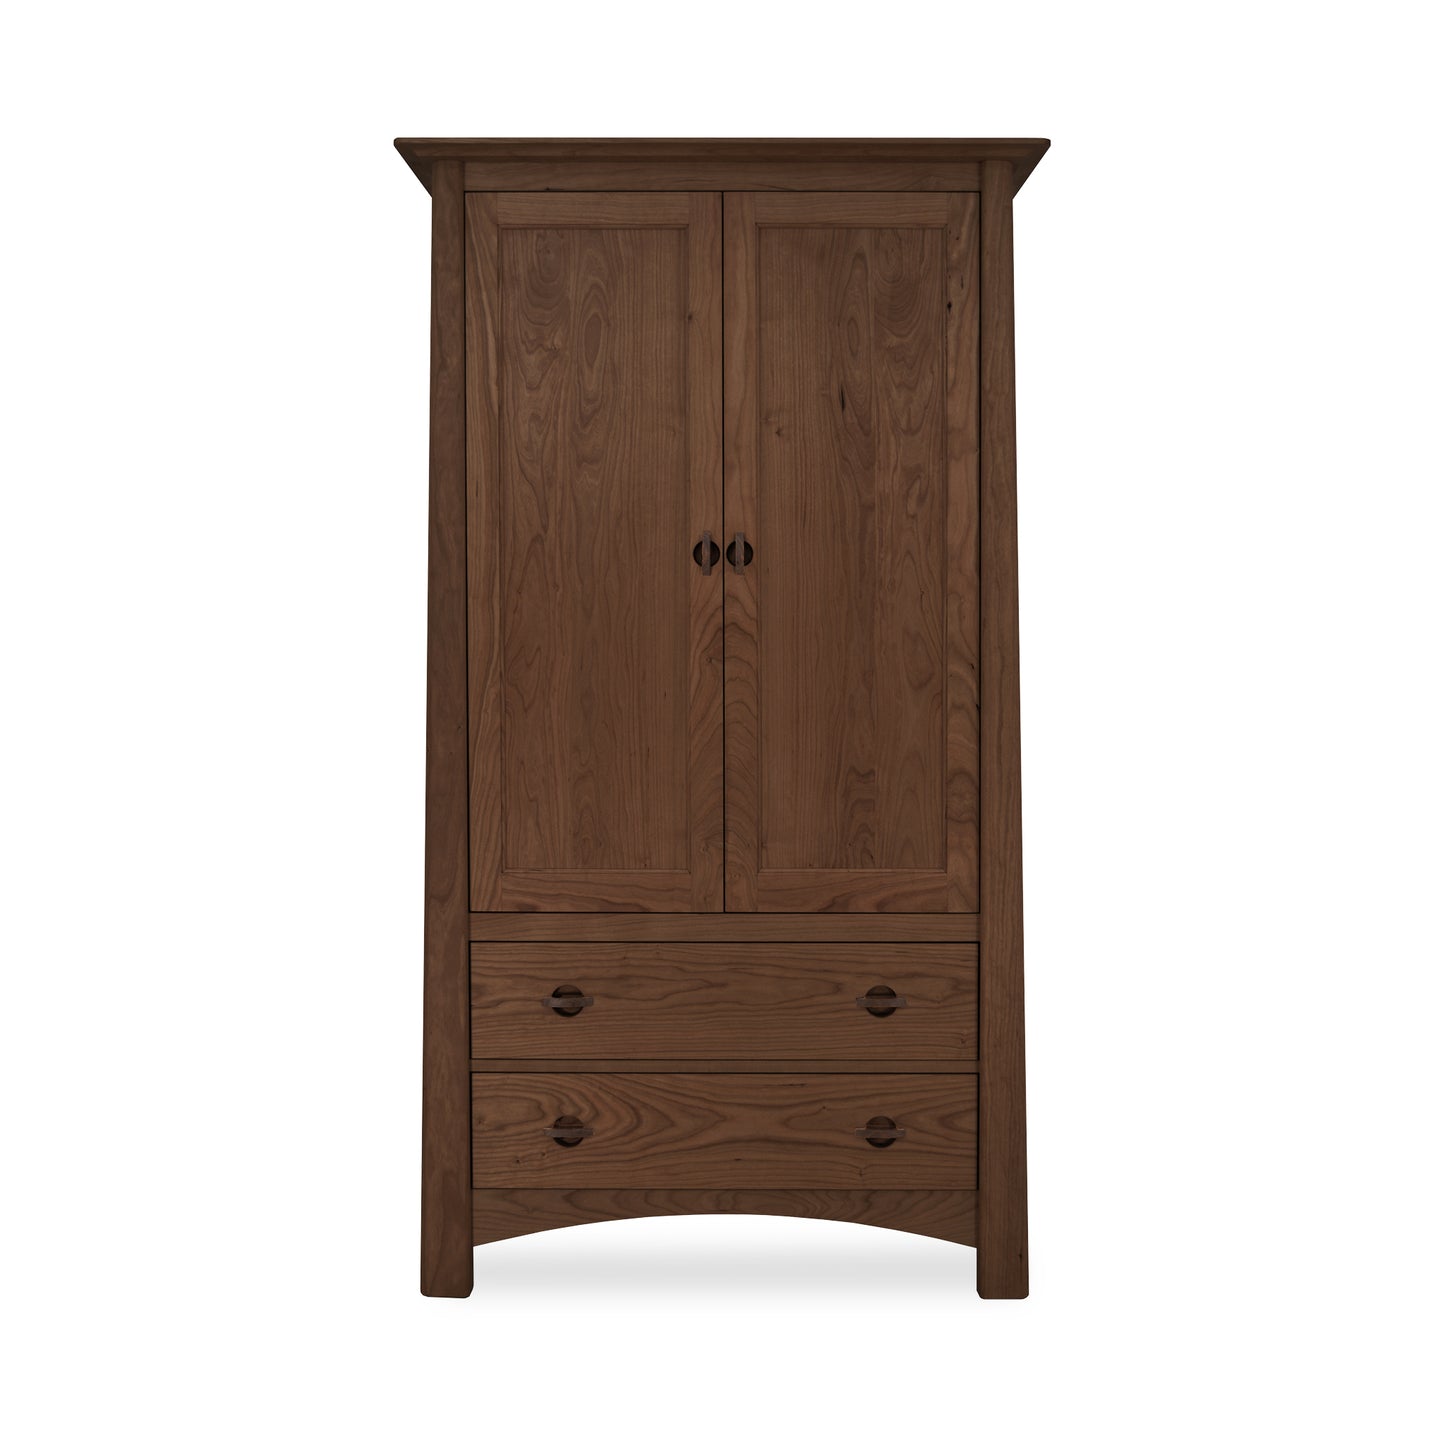 A high-end, handcrafted Cherry Moon Armoire with two drawers by Maple Corner Woodworks.